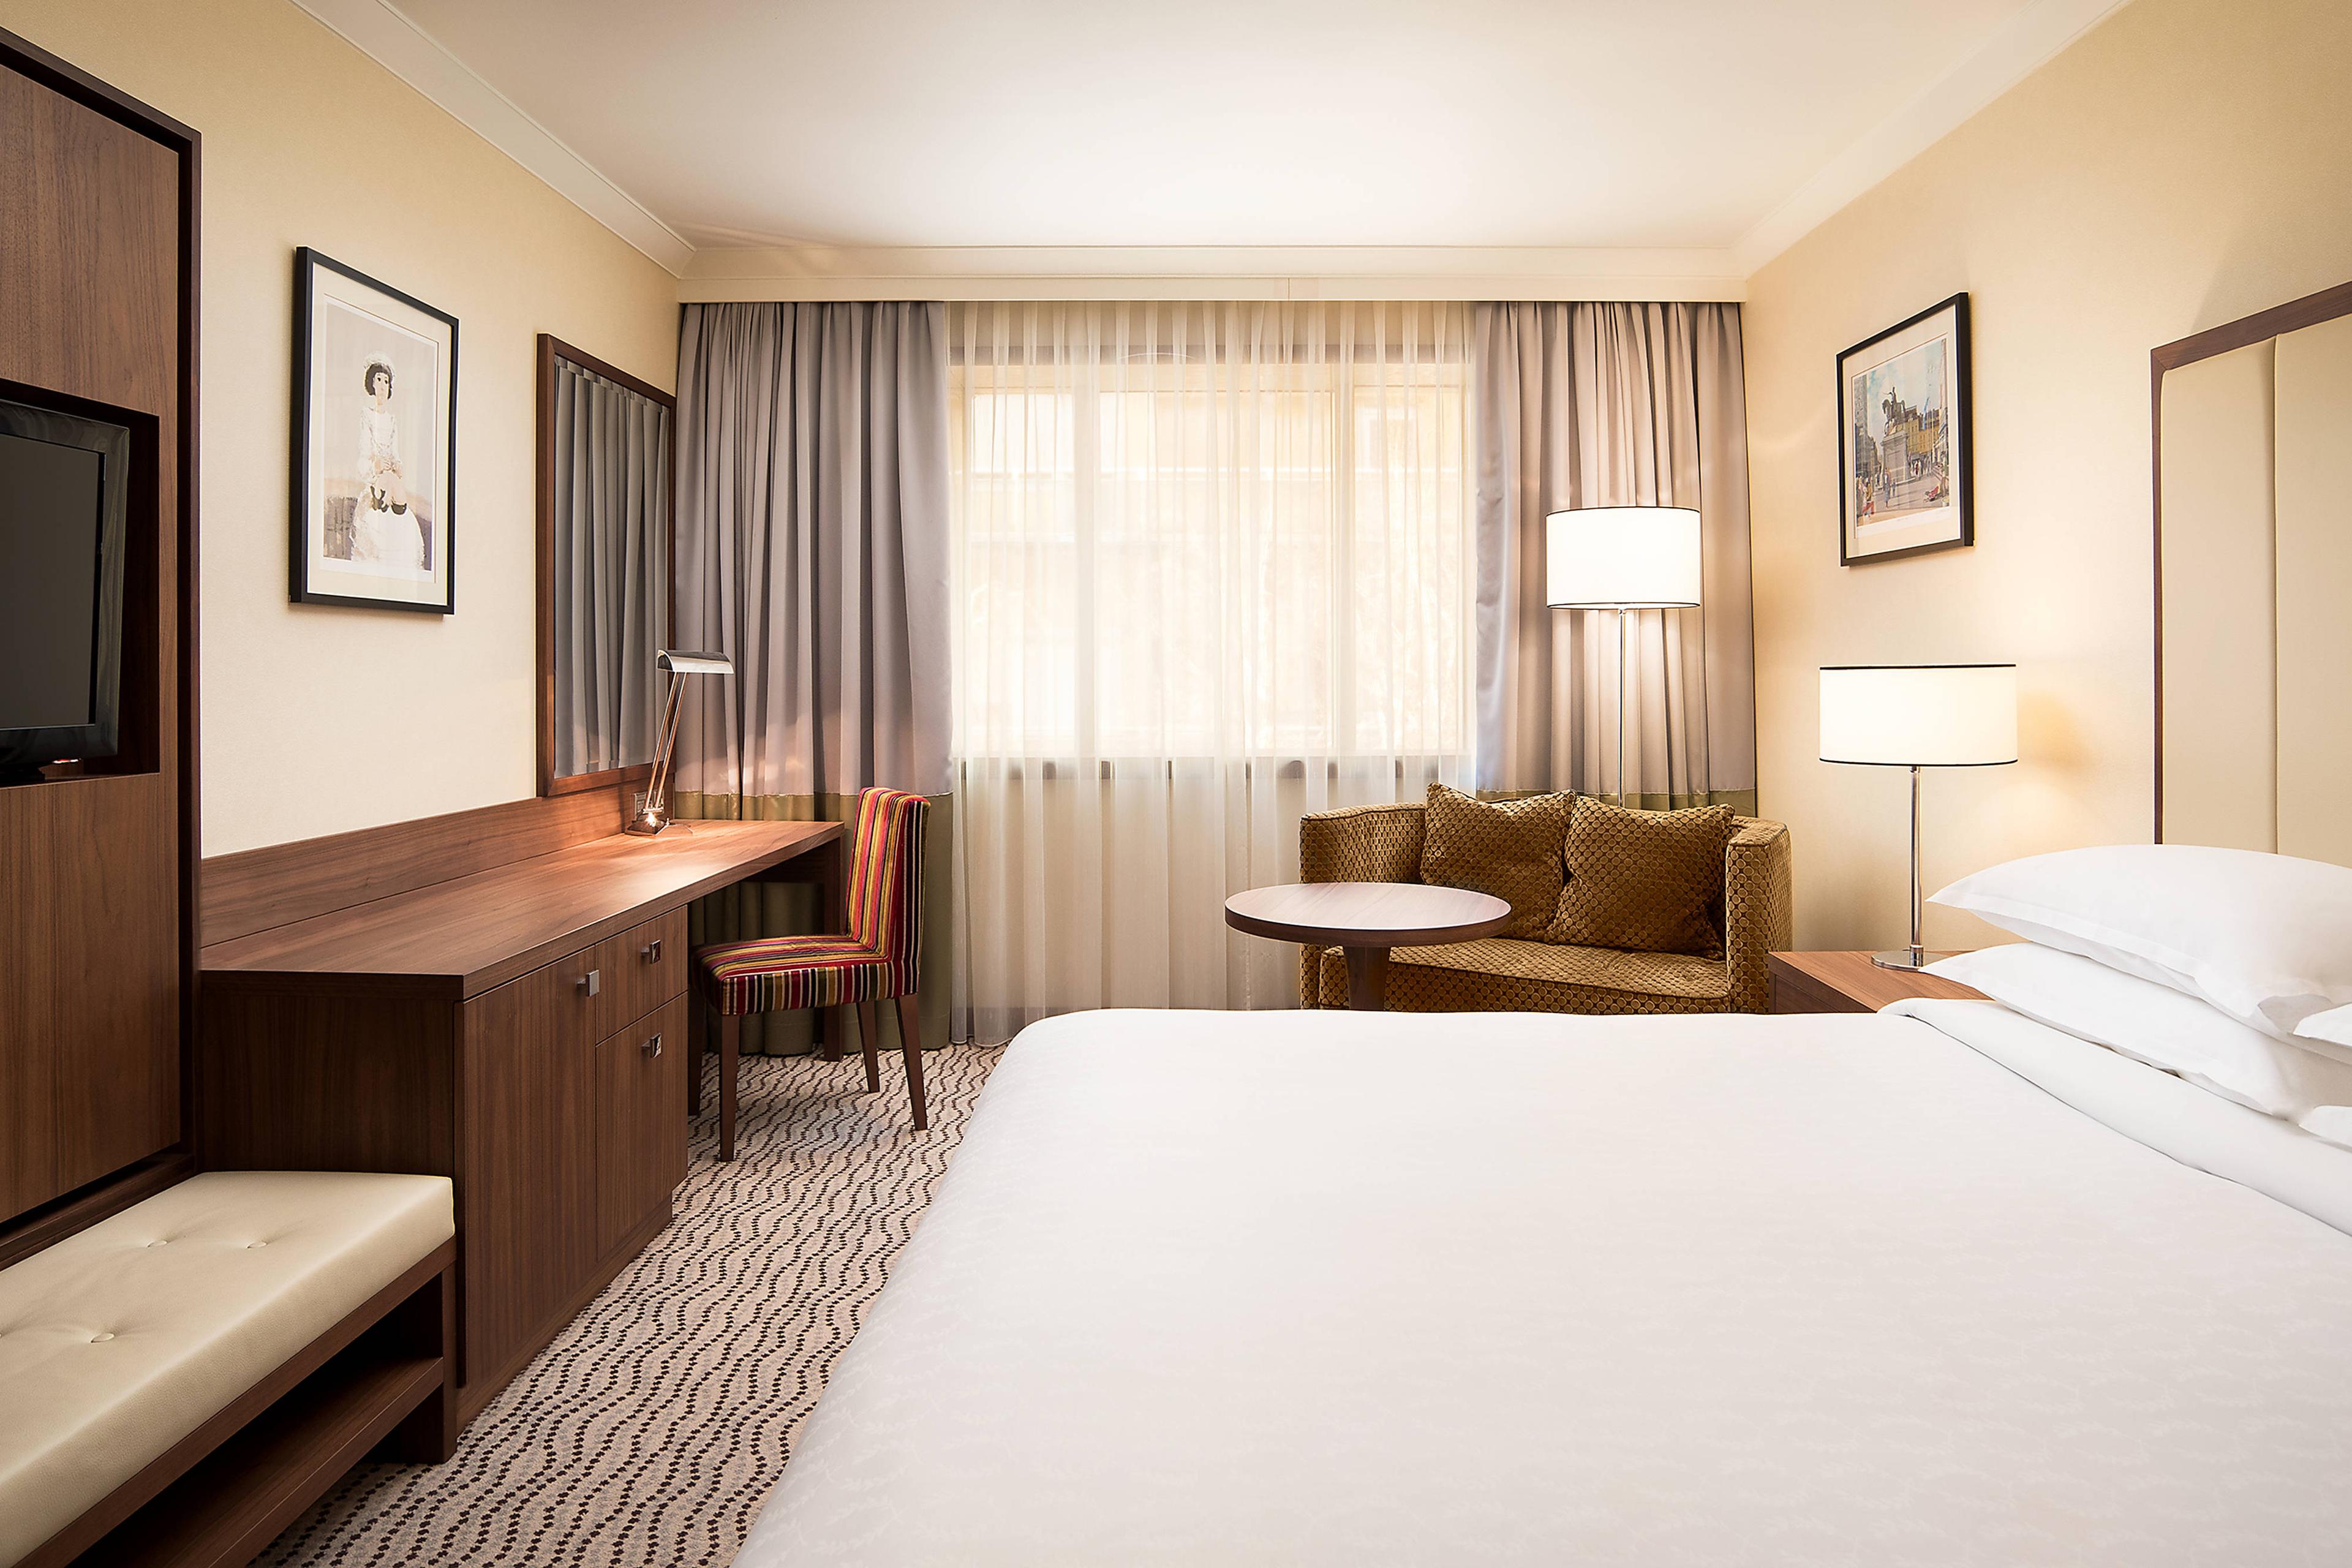 Enjoy the spacious accommodations in our Deluxe rooms, featuring King size beds with Sheraton Signature bed.